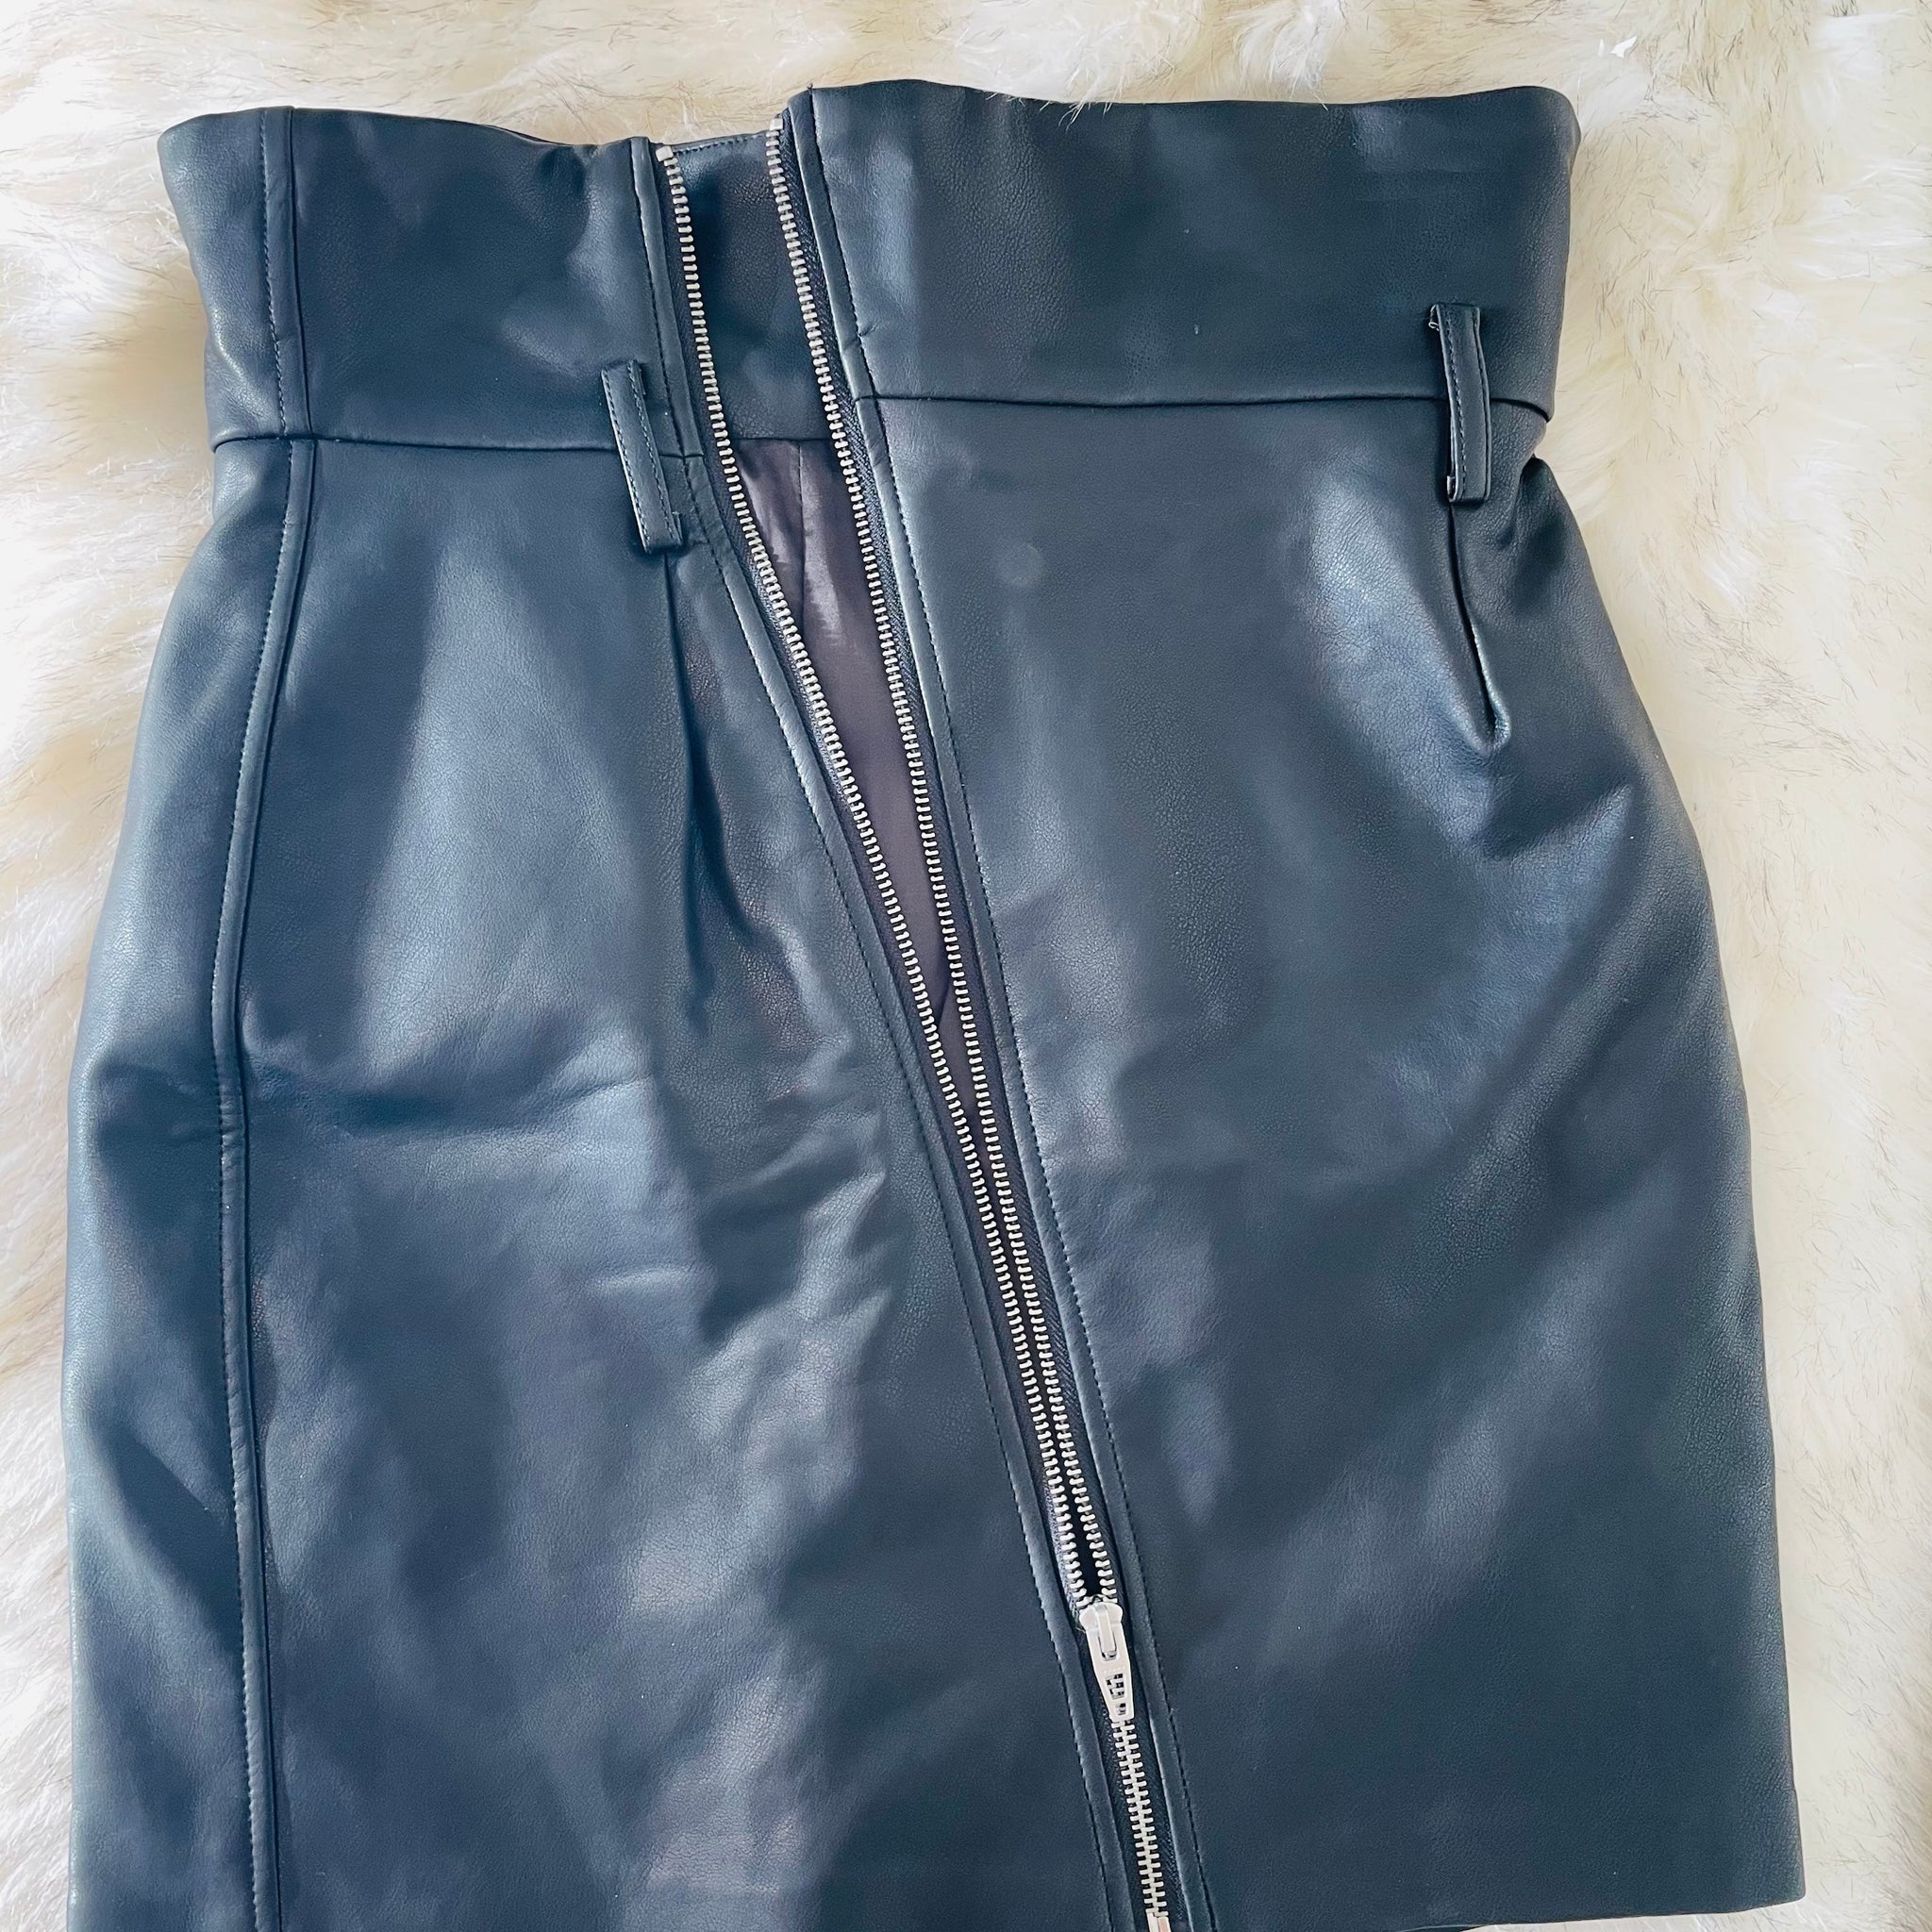 NEW Blank NYC skirt, Size 25